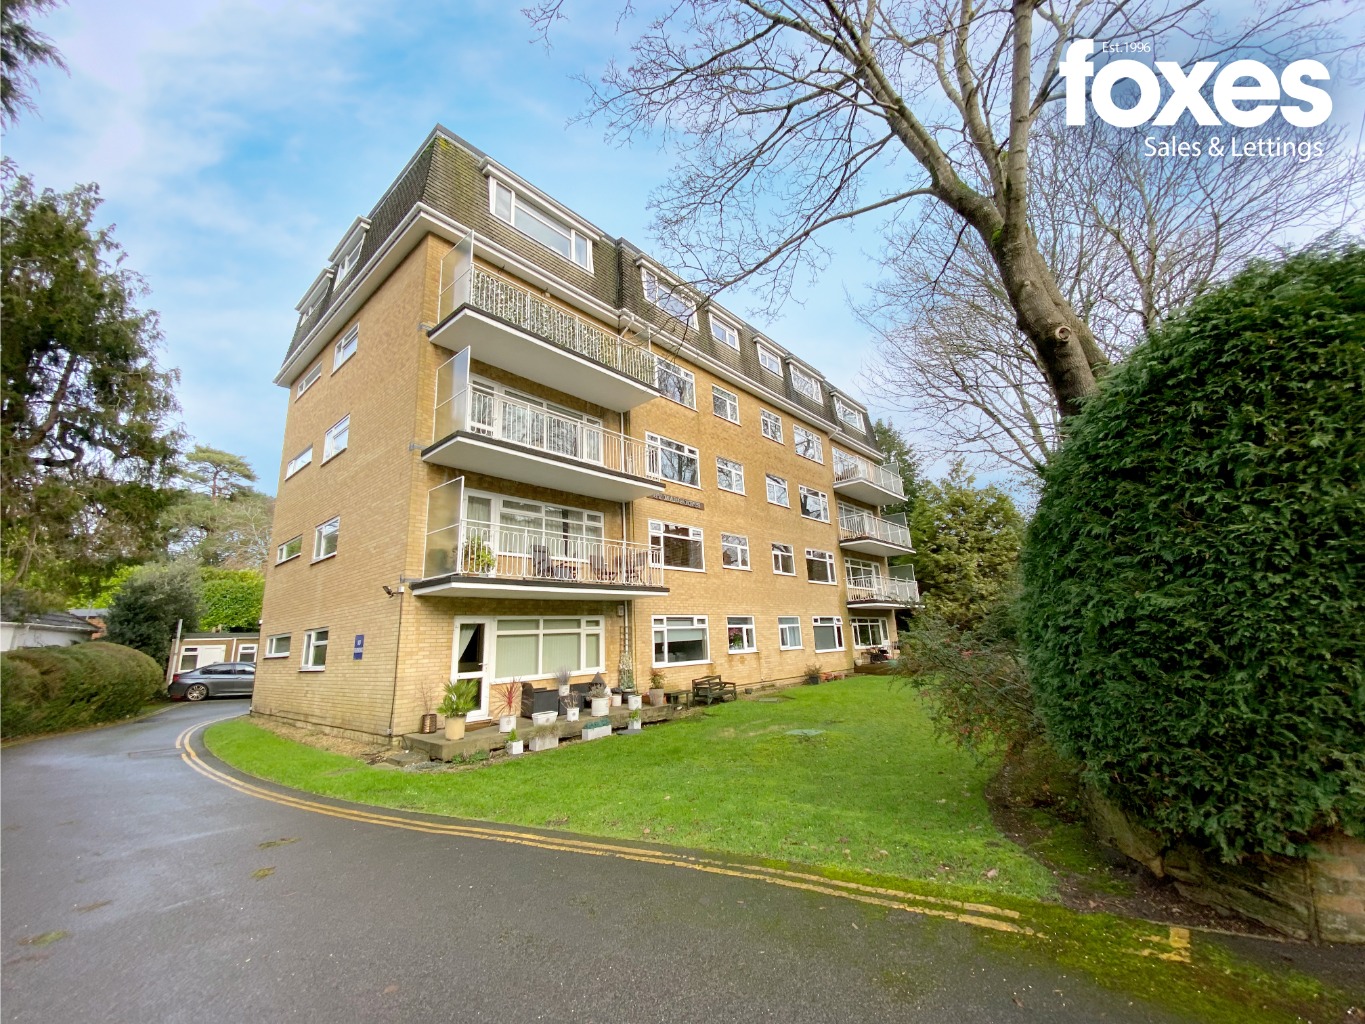 2 bed flat for sale in St. Valerie Road, Bournemouth - Property Image 1